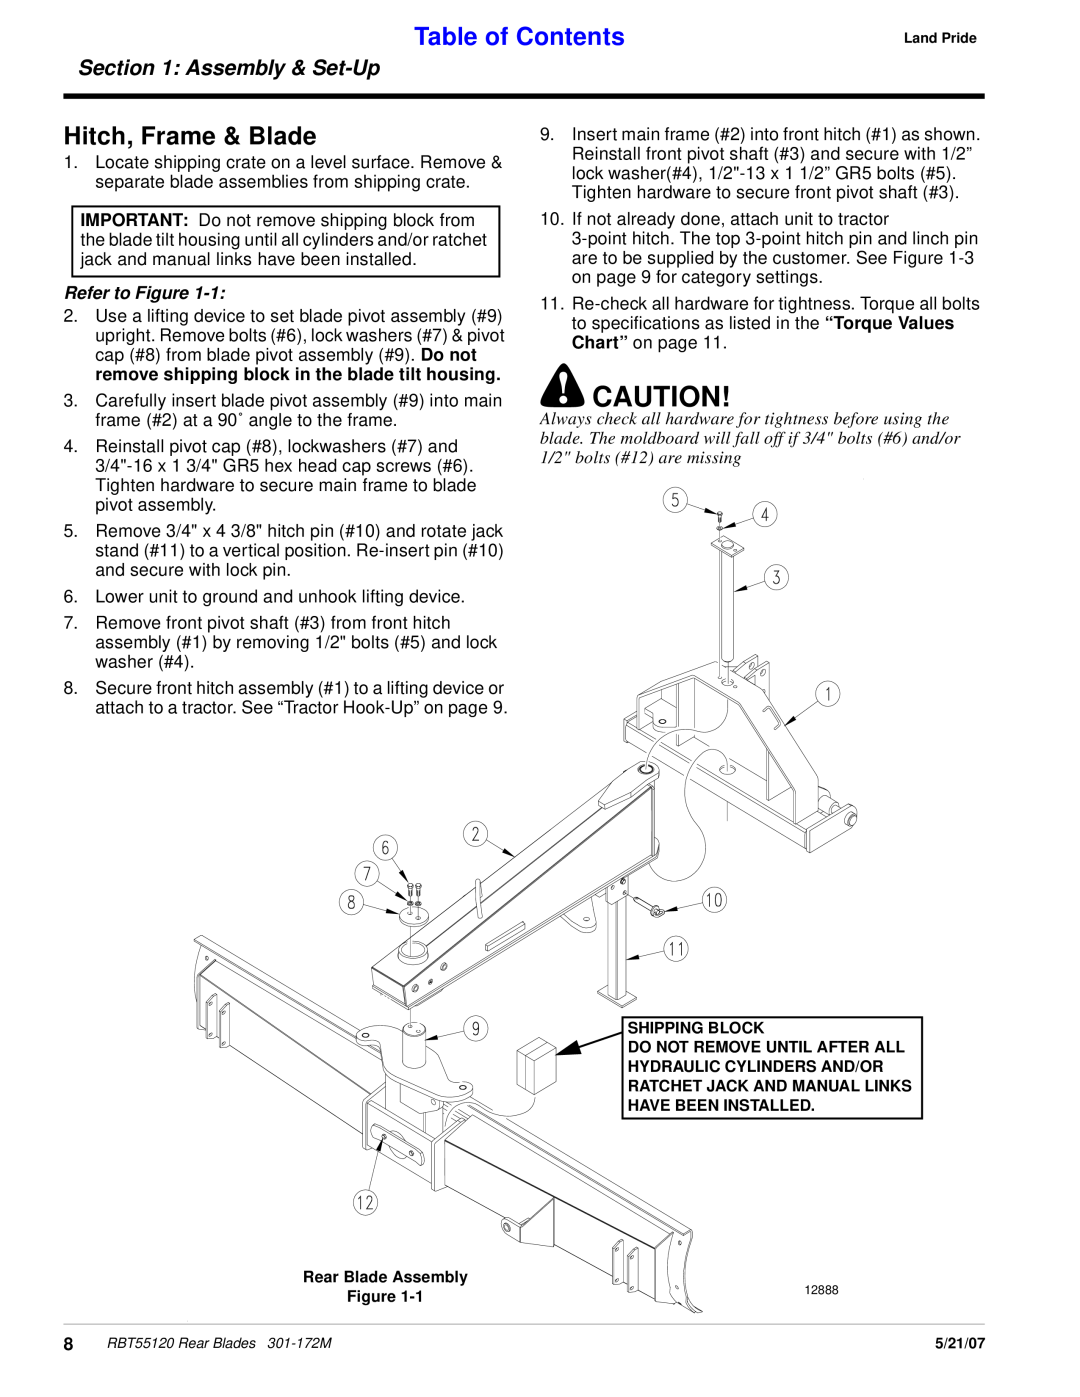 Land Pride RBT55120 manual Hitch, Frame & Blade, Refer to Figure, Table of Contents, Assembly & Set-Up 